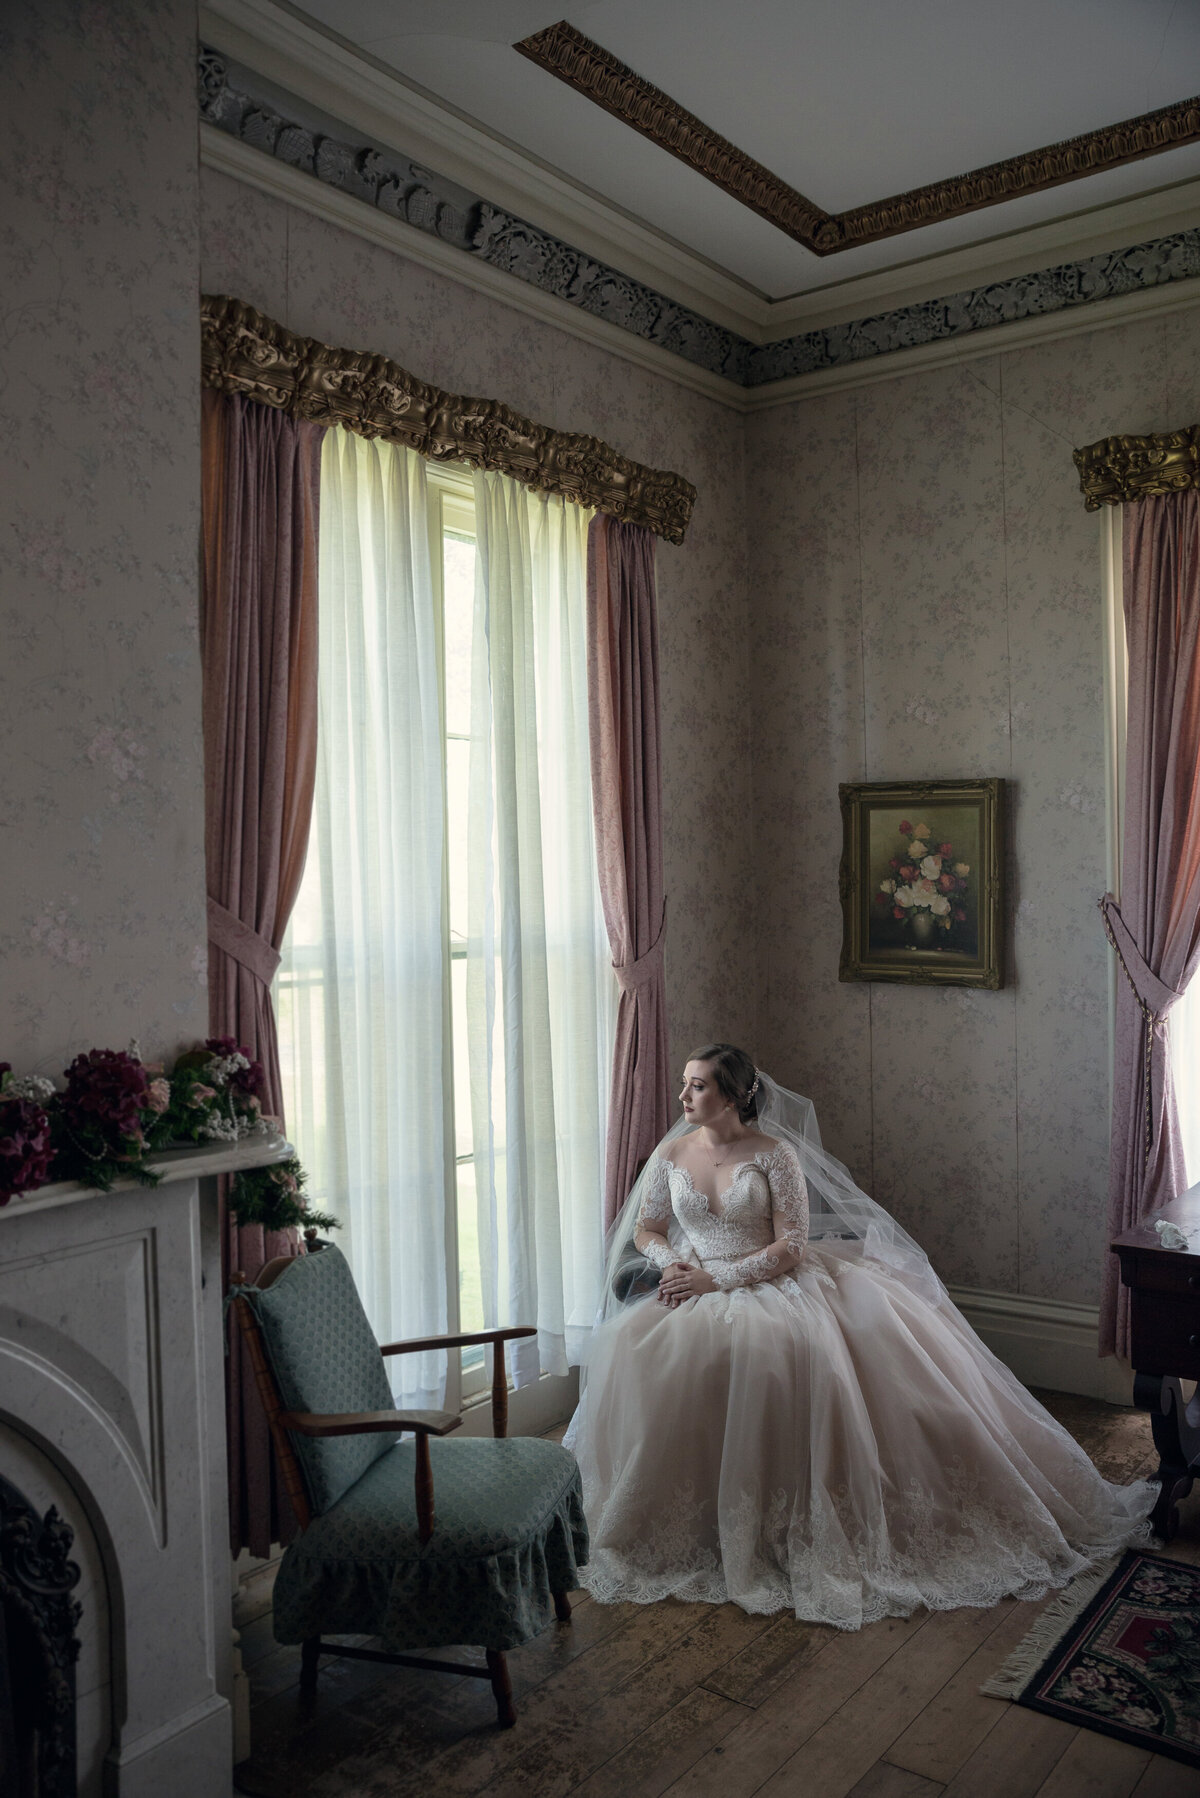 Bride sitting looking out window in front of a vintage painting.